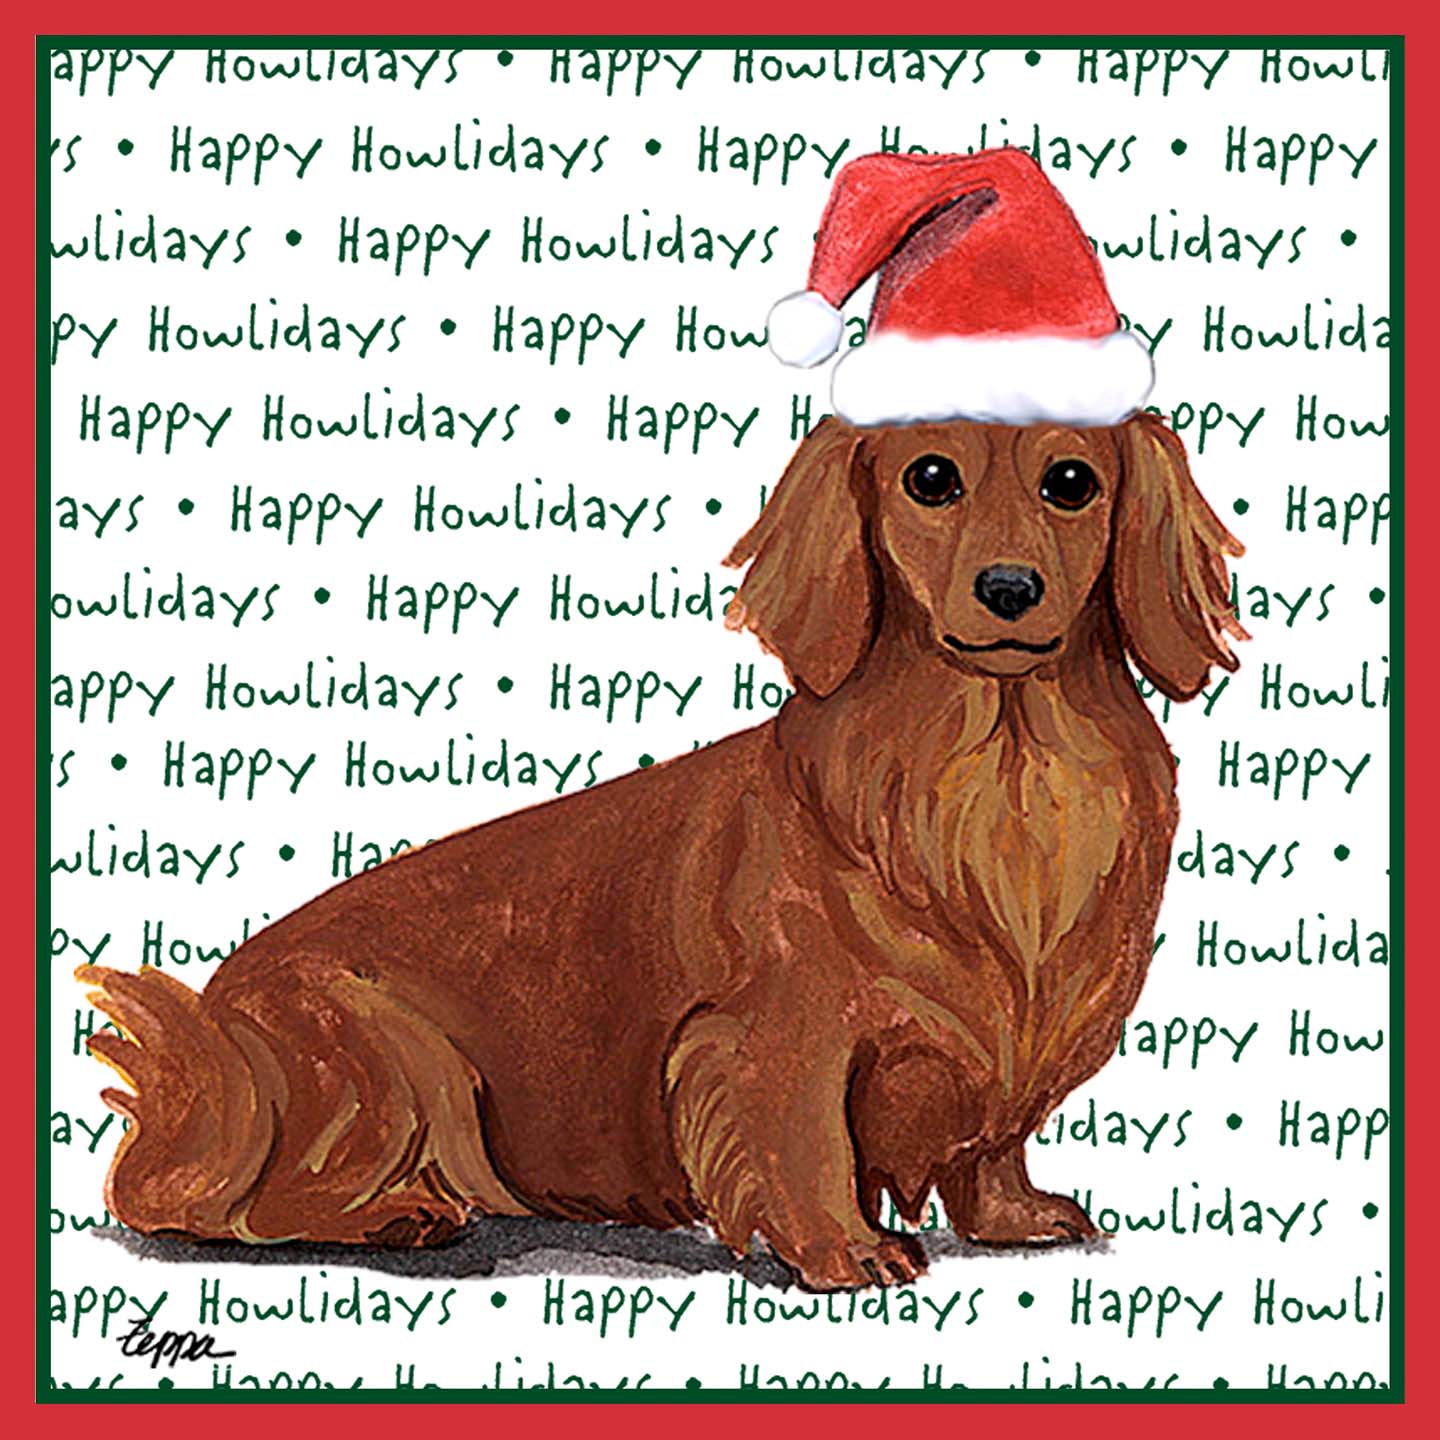 Dachshund (Red Long Haired) Happy Howlidays Text - Adult Unisex T-Shirt